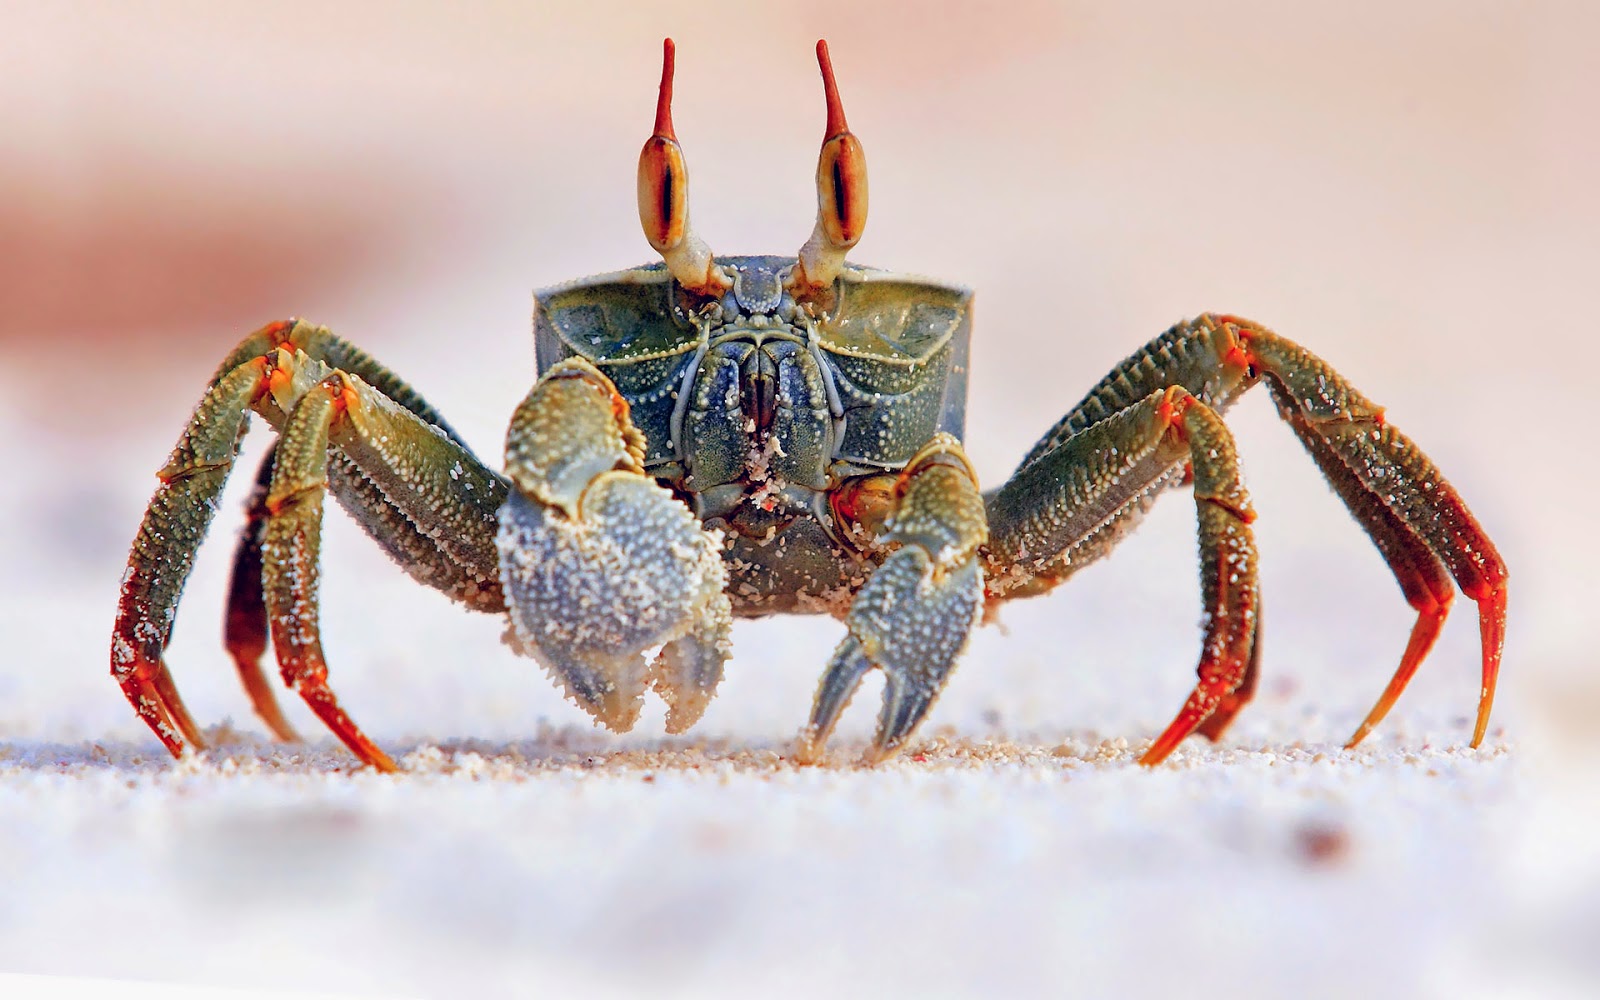 A Beautiful Crab Wallpaper For Windows, Mac Os Or Your - Life Science Interactive Science Pearson - HD Wallpaper 